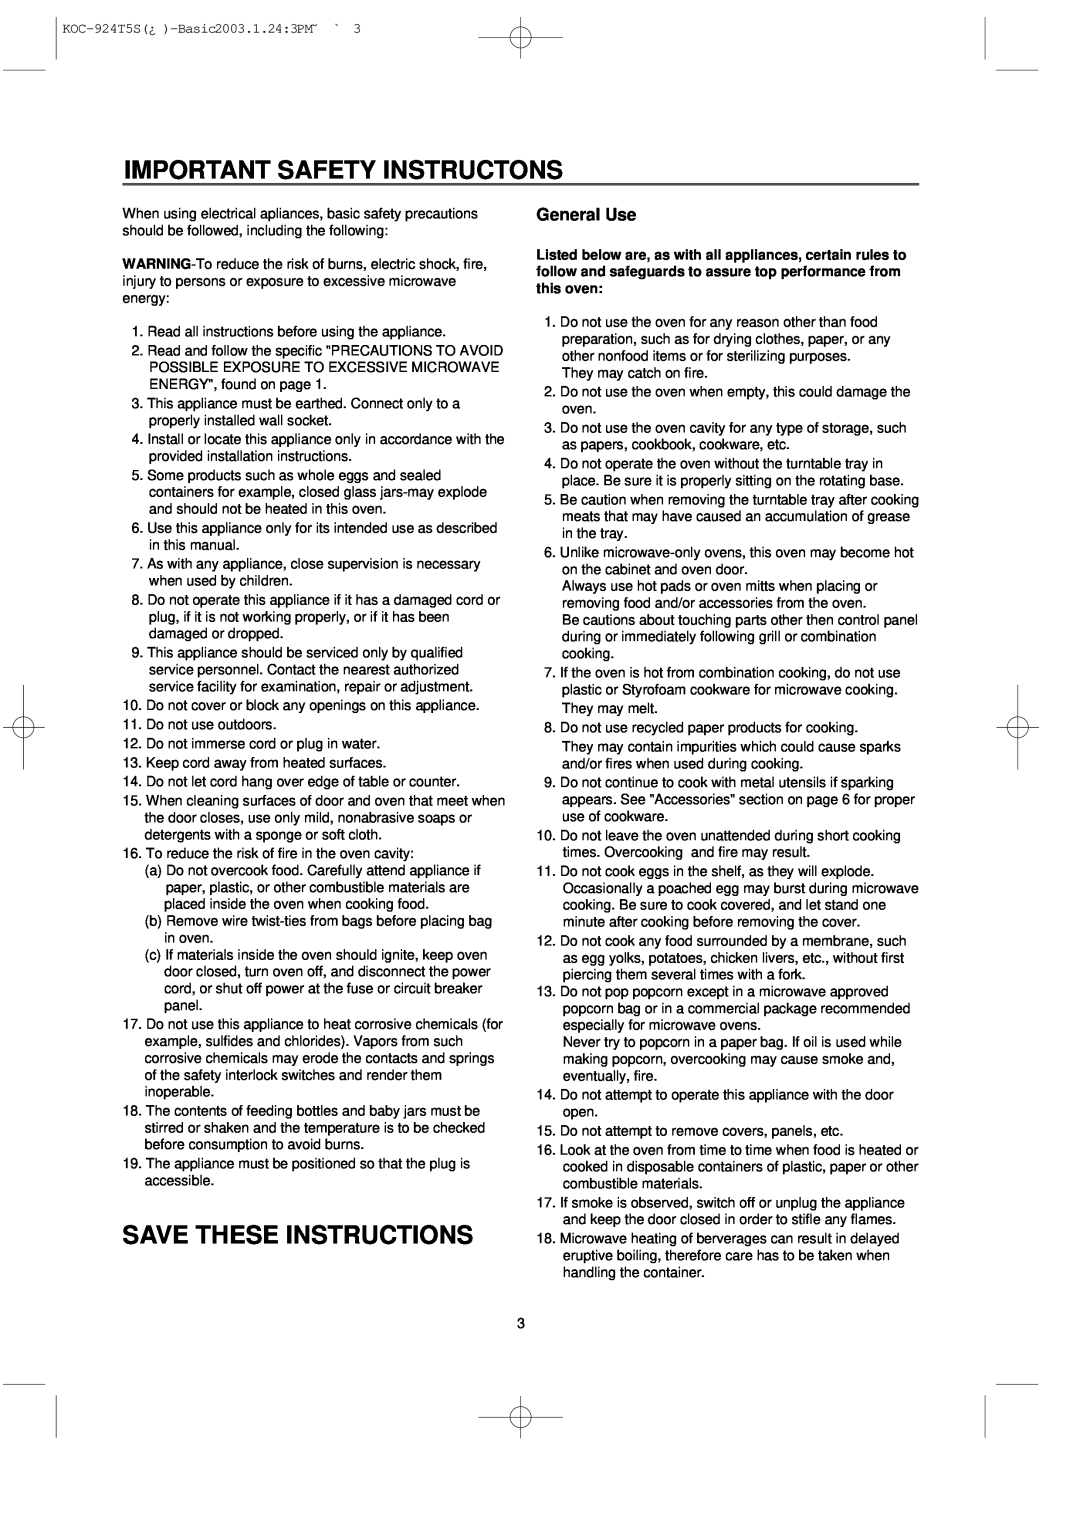 Daewoo KOC-924T0S, KOC-924T5S owner manual Important Safety Instructons, Save These Instructions, General Use 